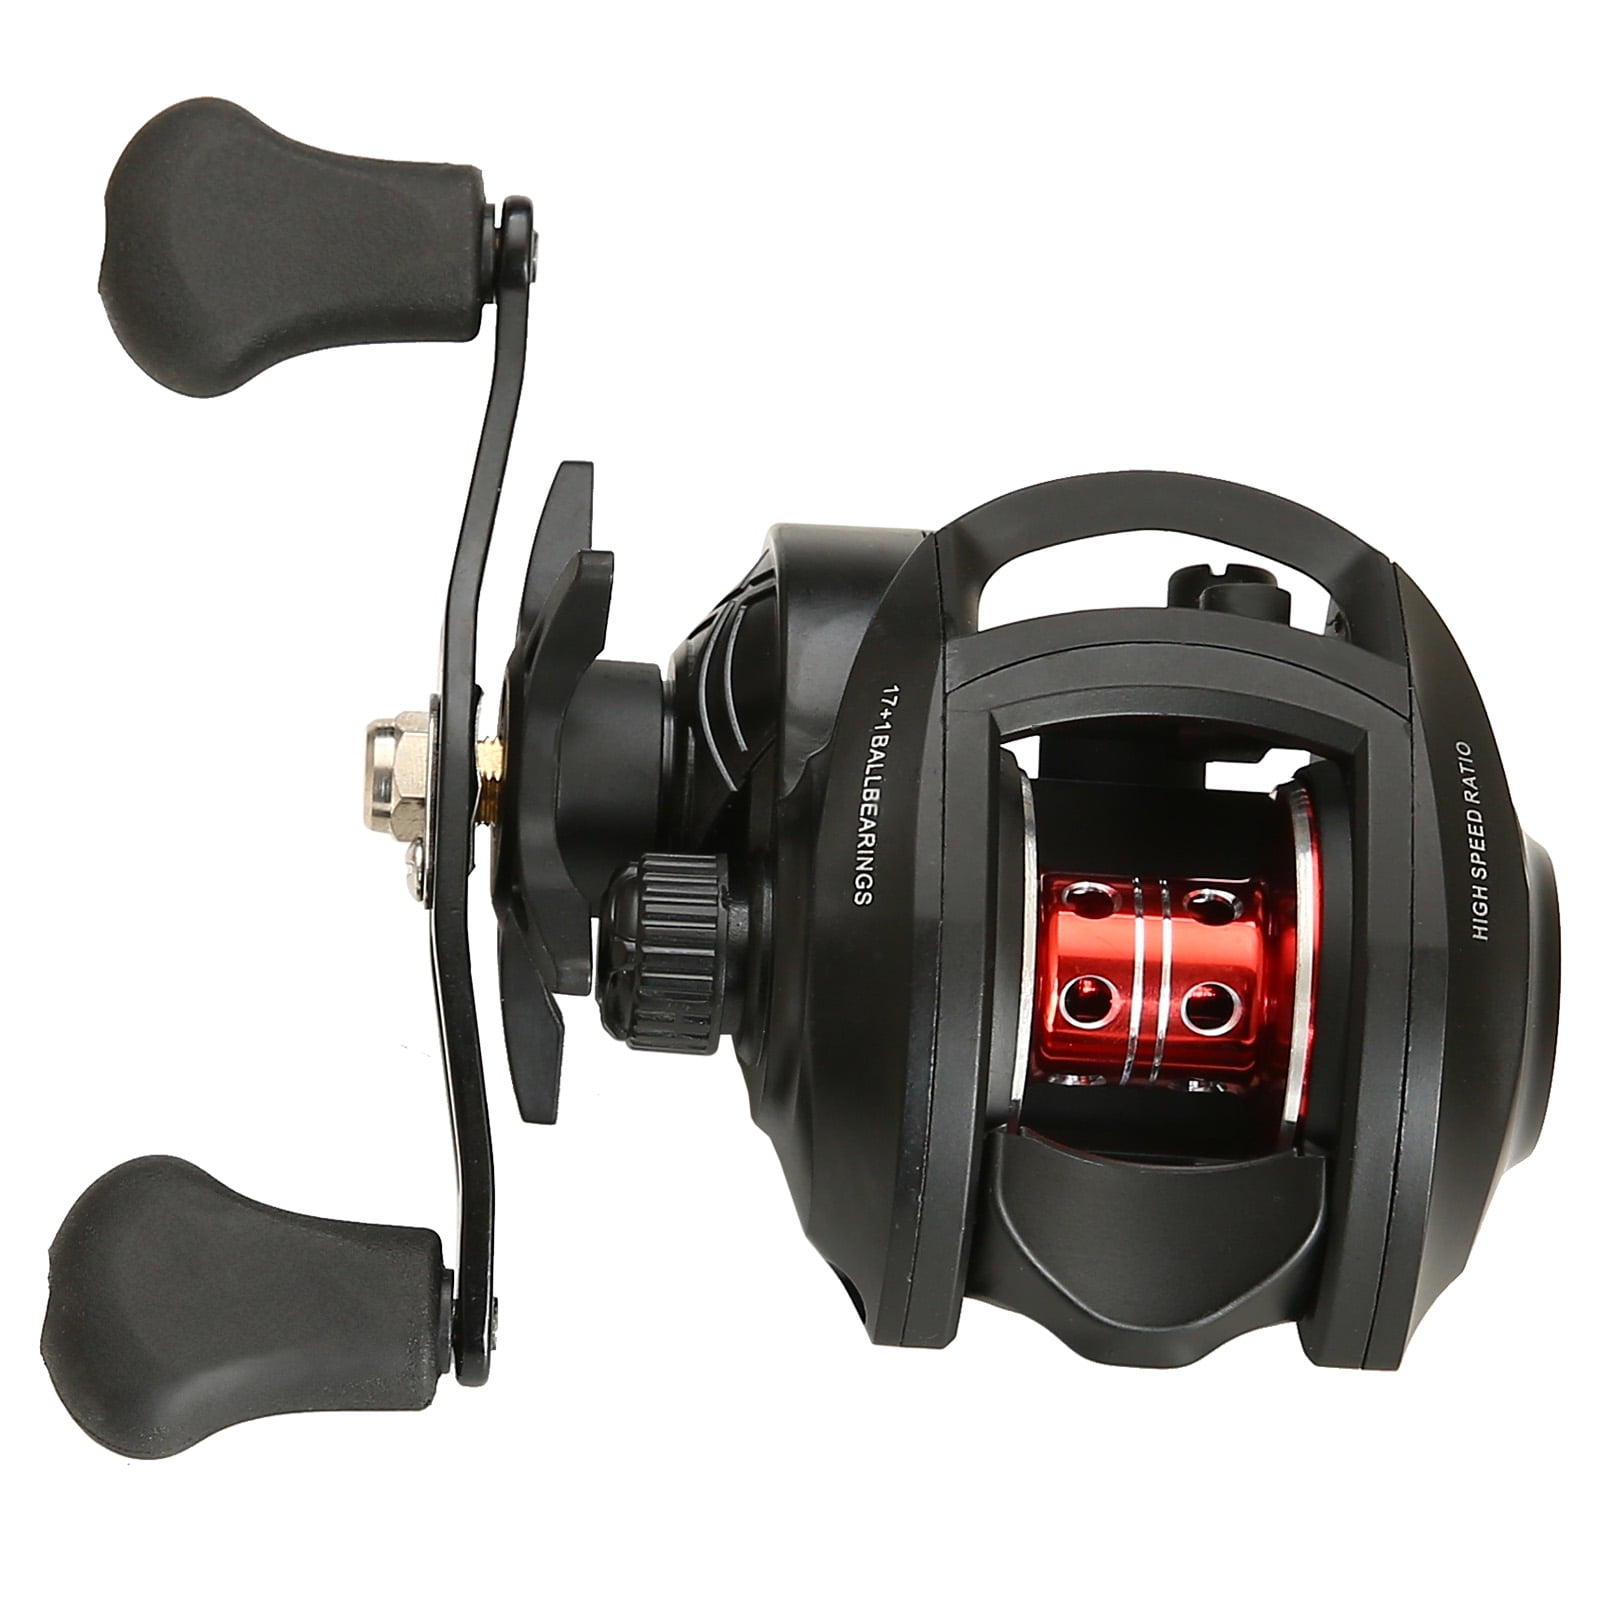 Magnetic Brake System Bait Caster Fishing Reel Outdoor Ultra Smooth High Speed 